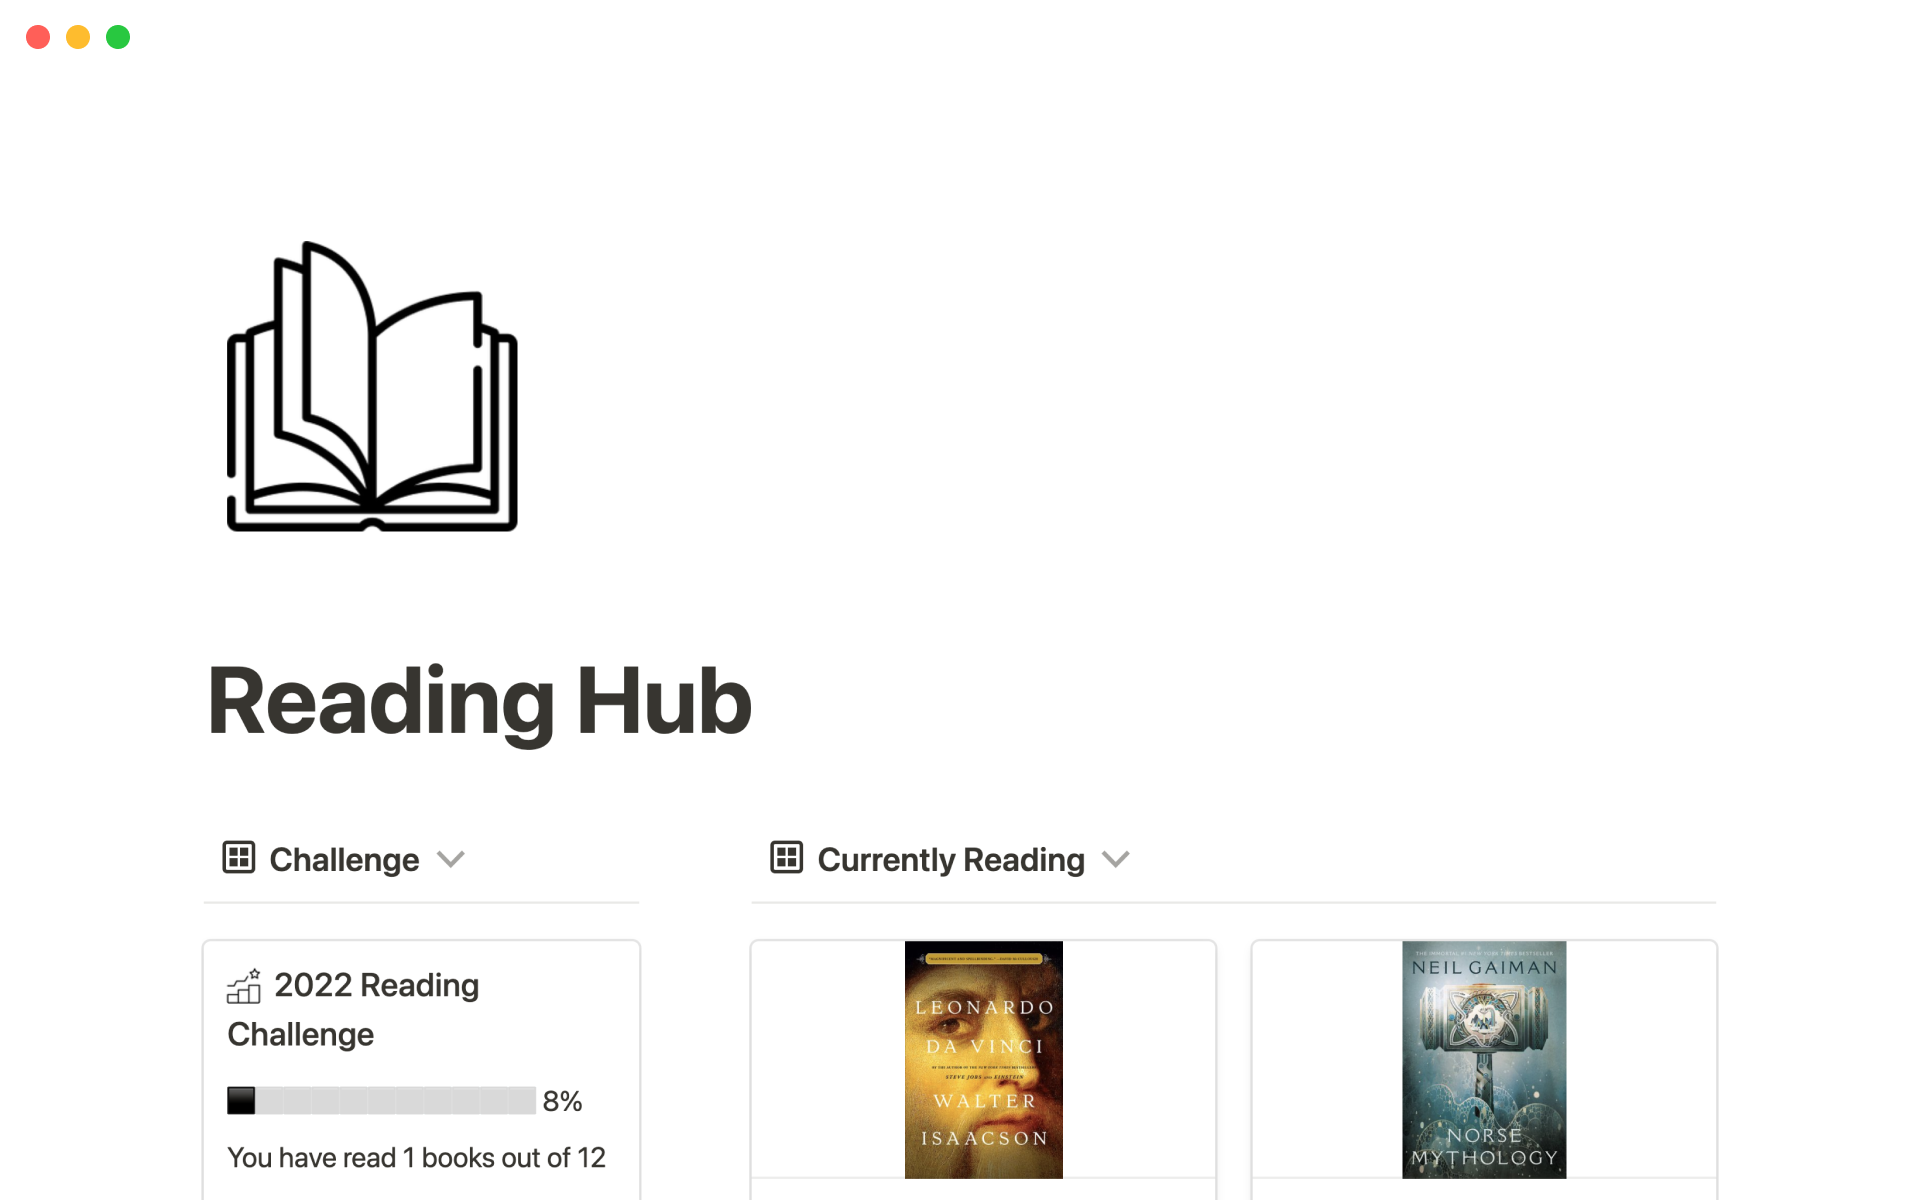 How To Open A Bookstore - Blogging Hub